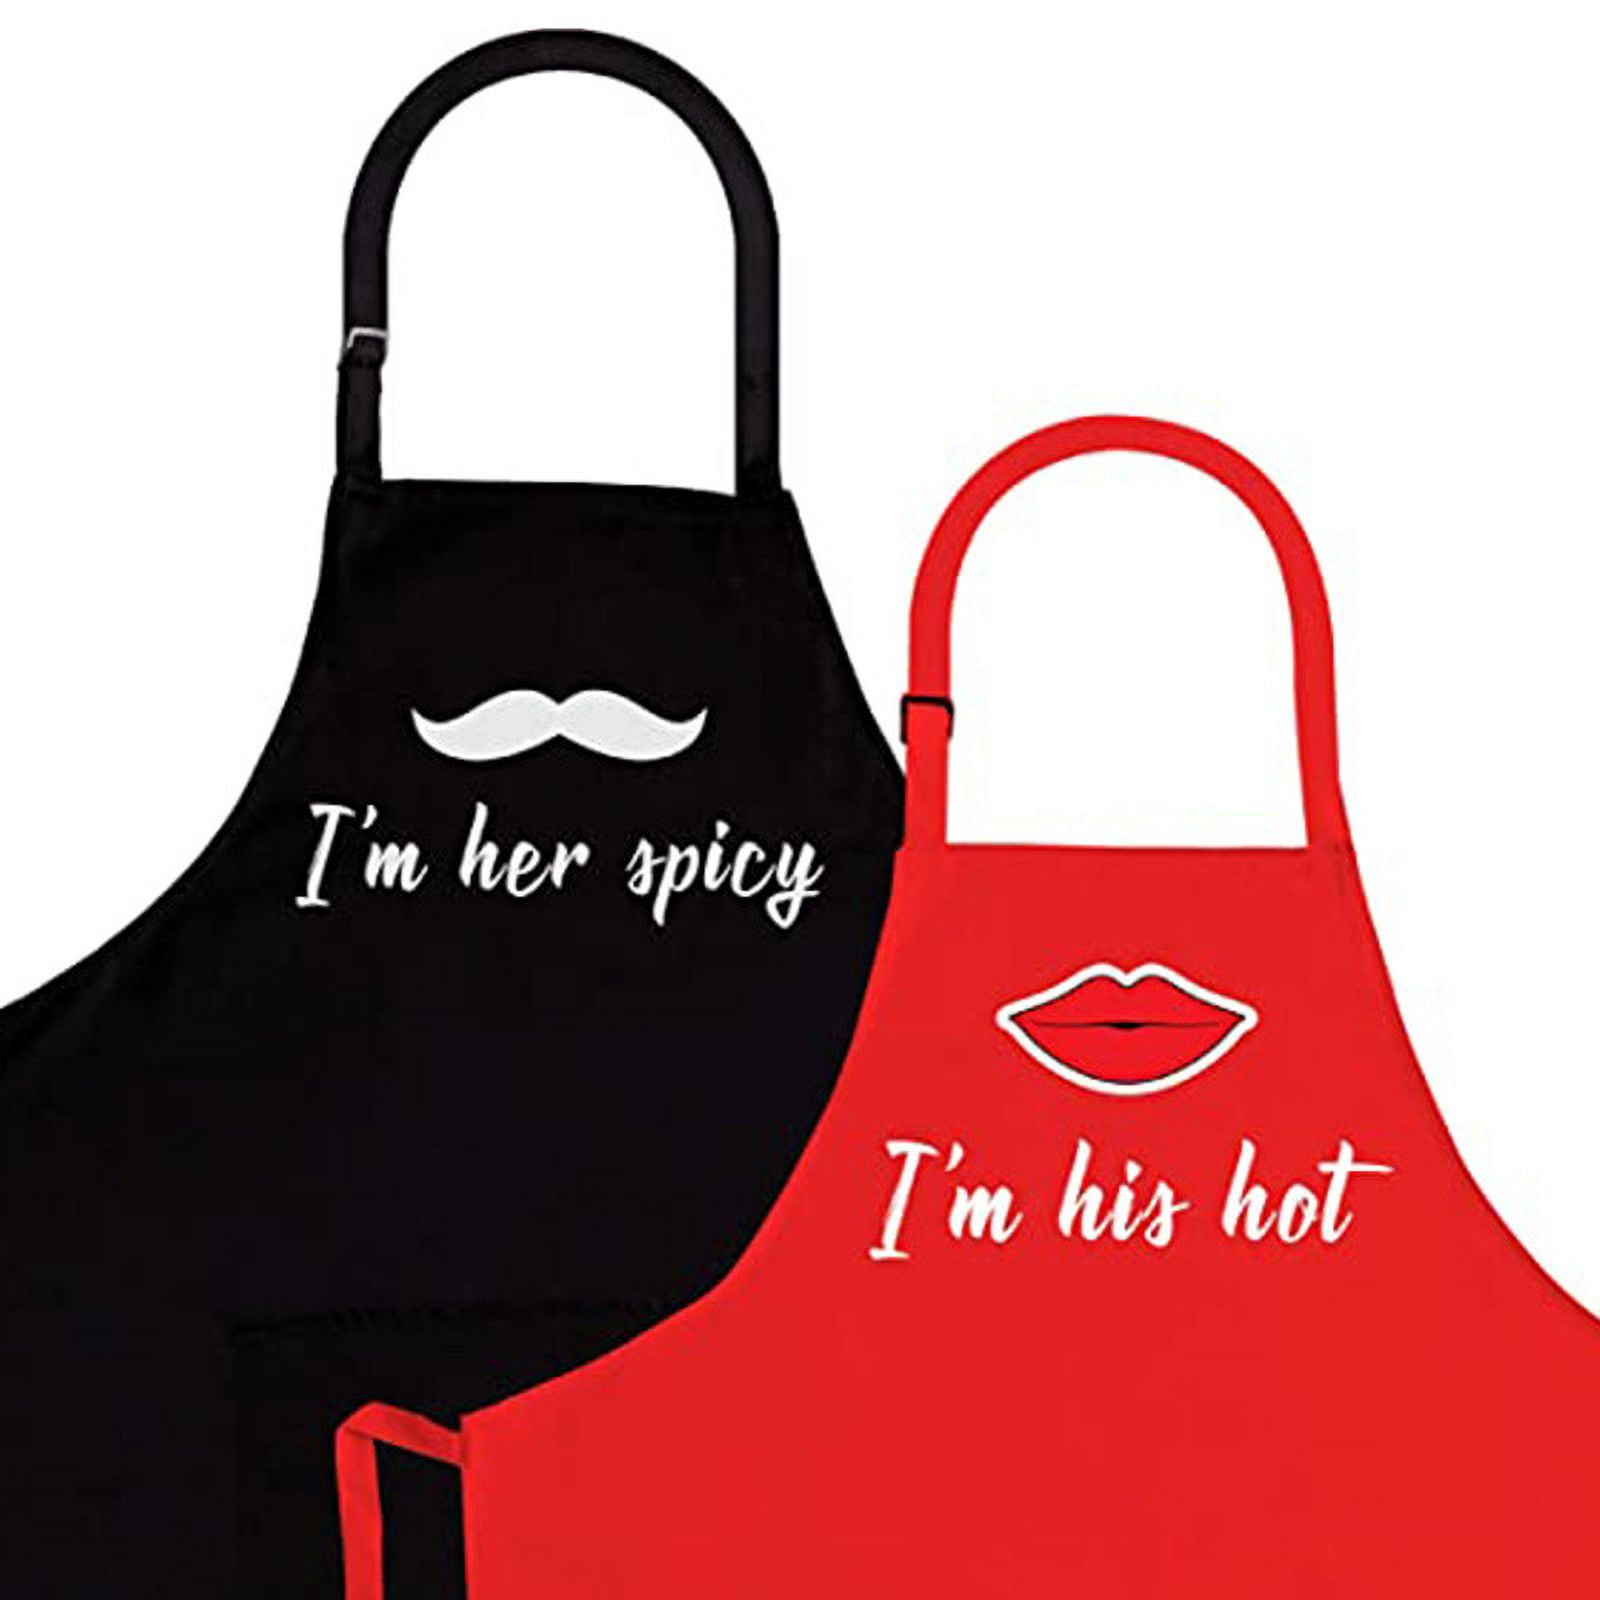 Mr and Mrs Aprons for Couples Gifts - Anniversary, Bridal Shower, Wedding,  Engagement gifts for Couples, Christmas Gifts for Couple, His and Her